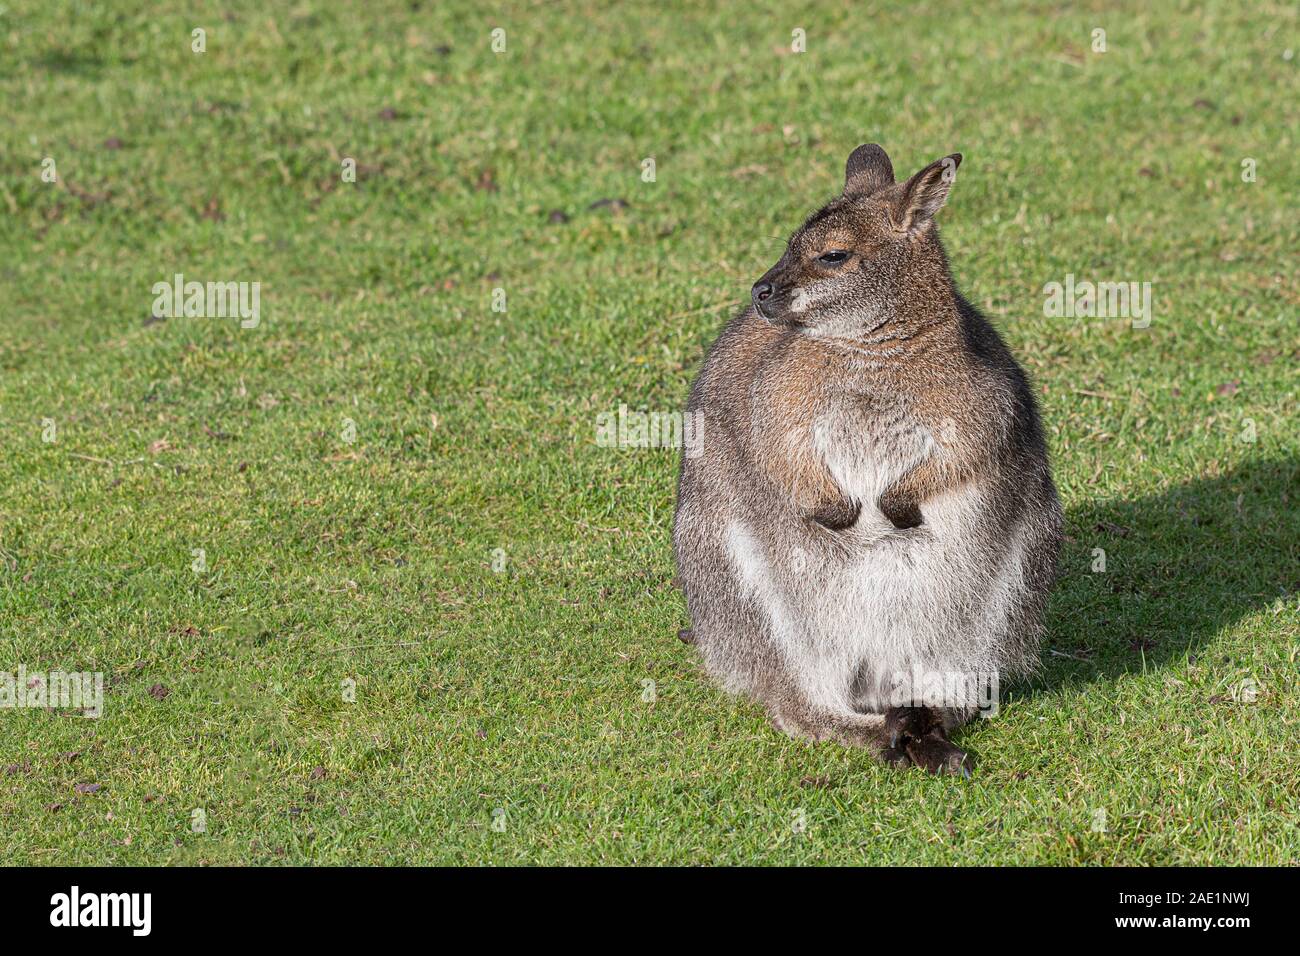 A wallaby sitting in sunshine on grass and looking to the left into plenty of copy space Stock Photo